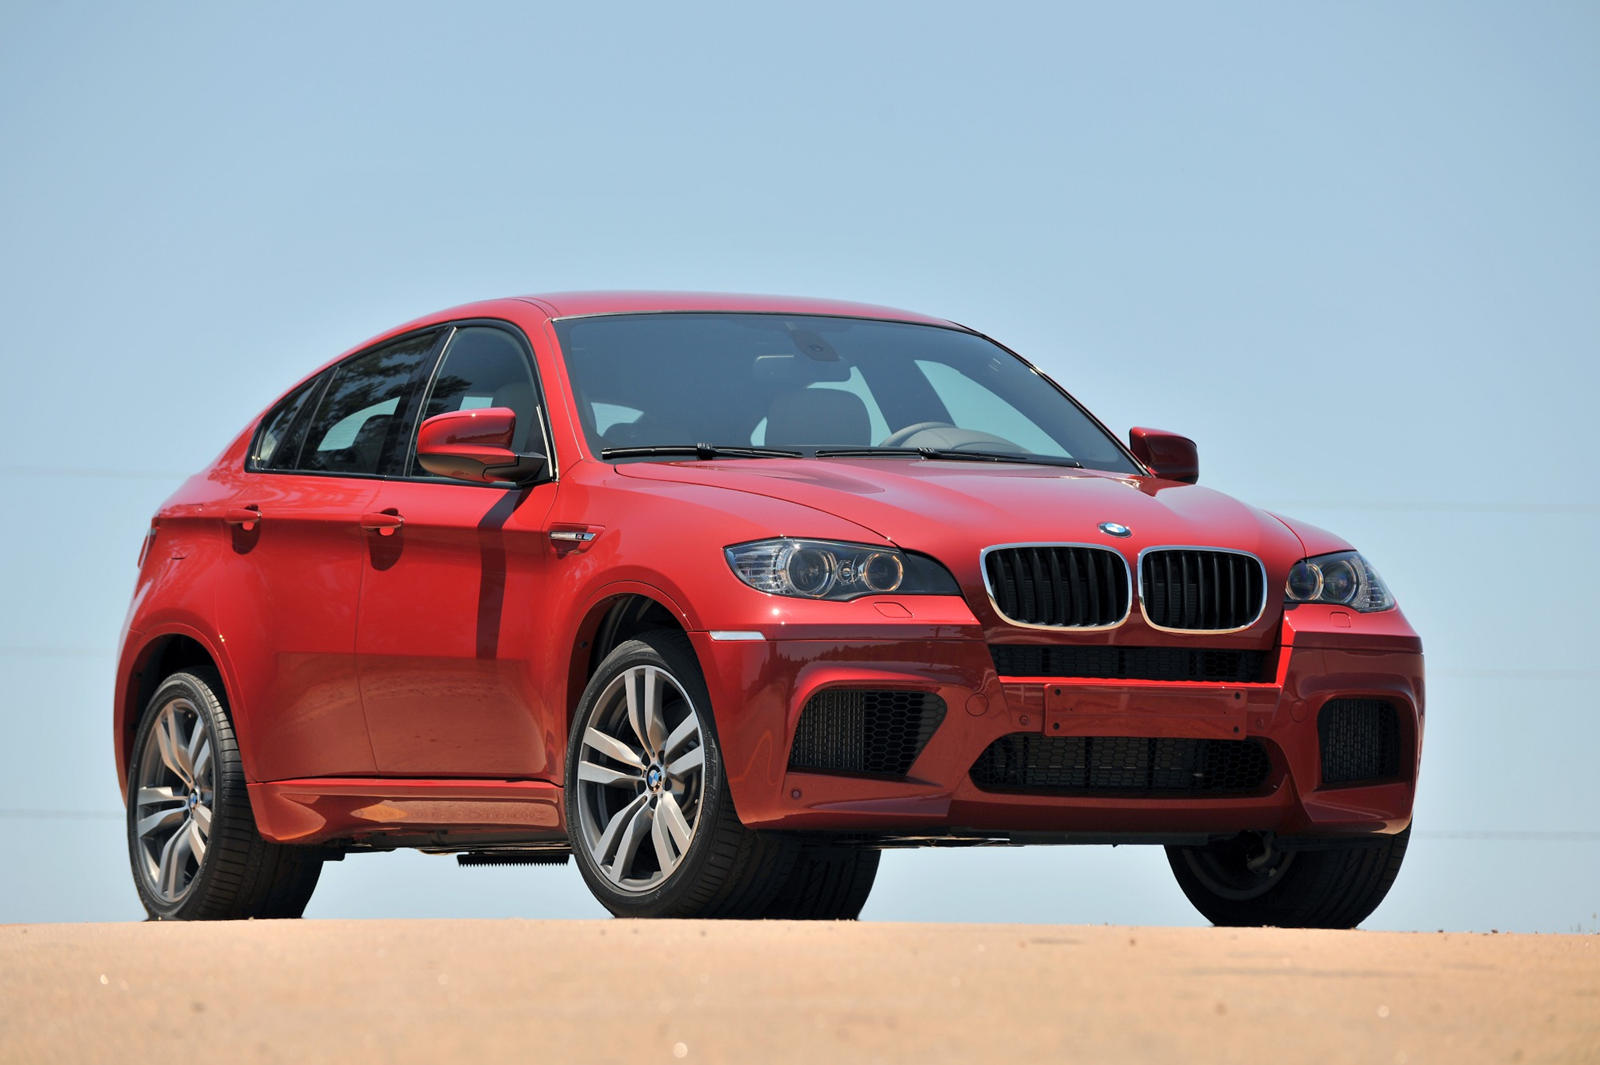 2010 BMW X6 M Front Angle View